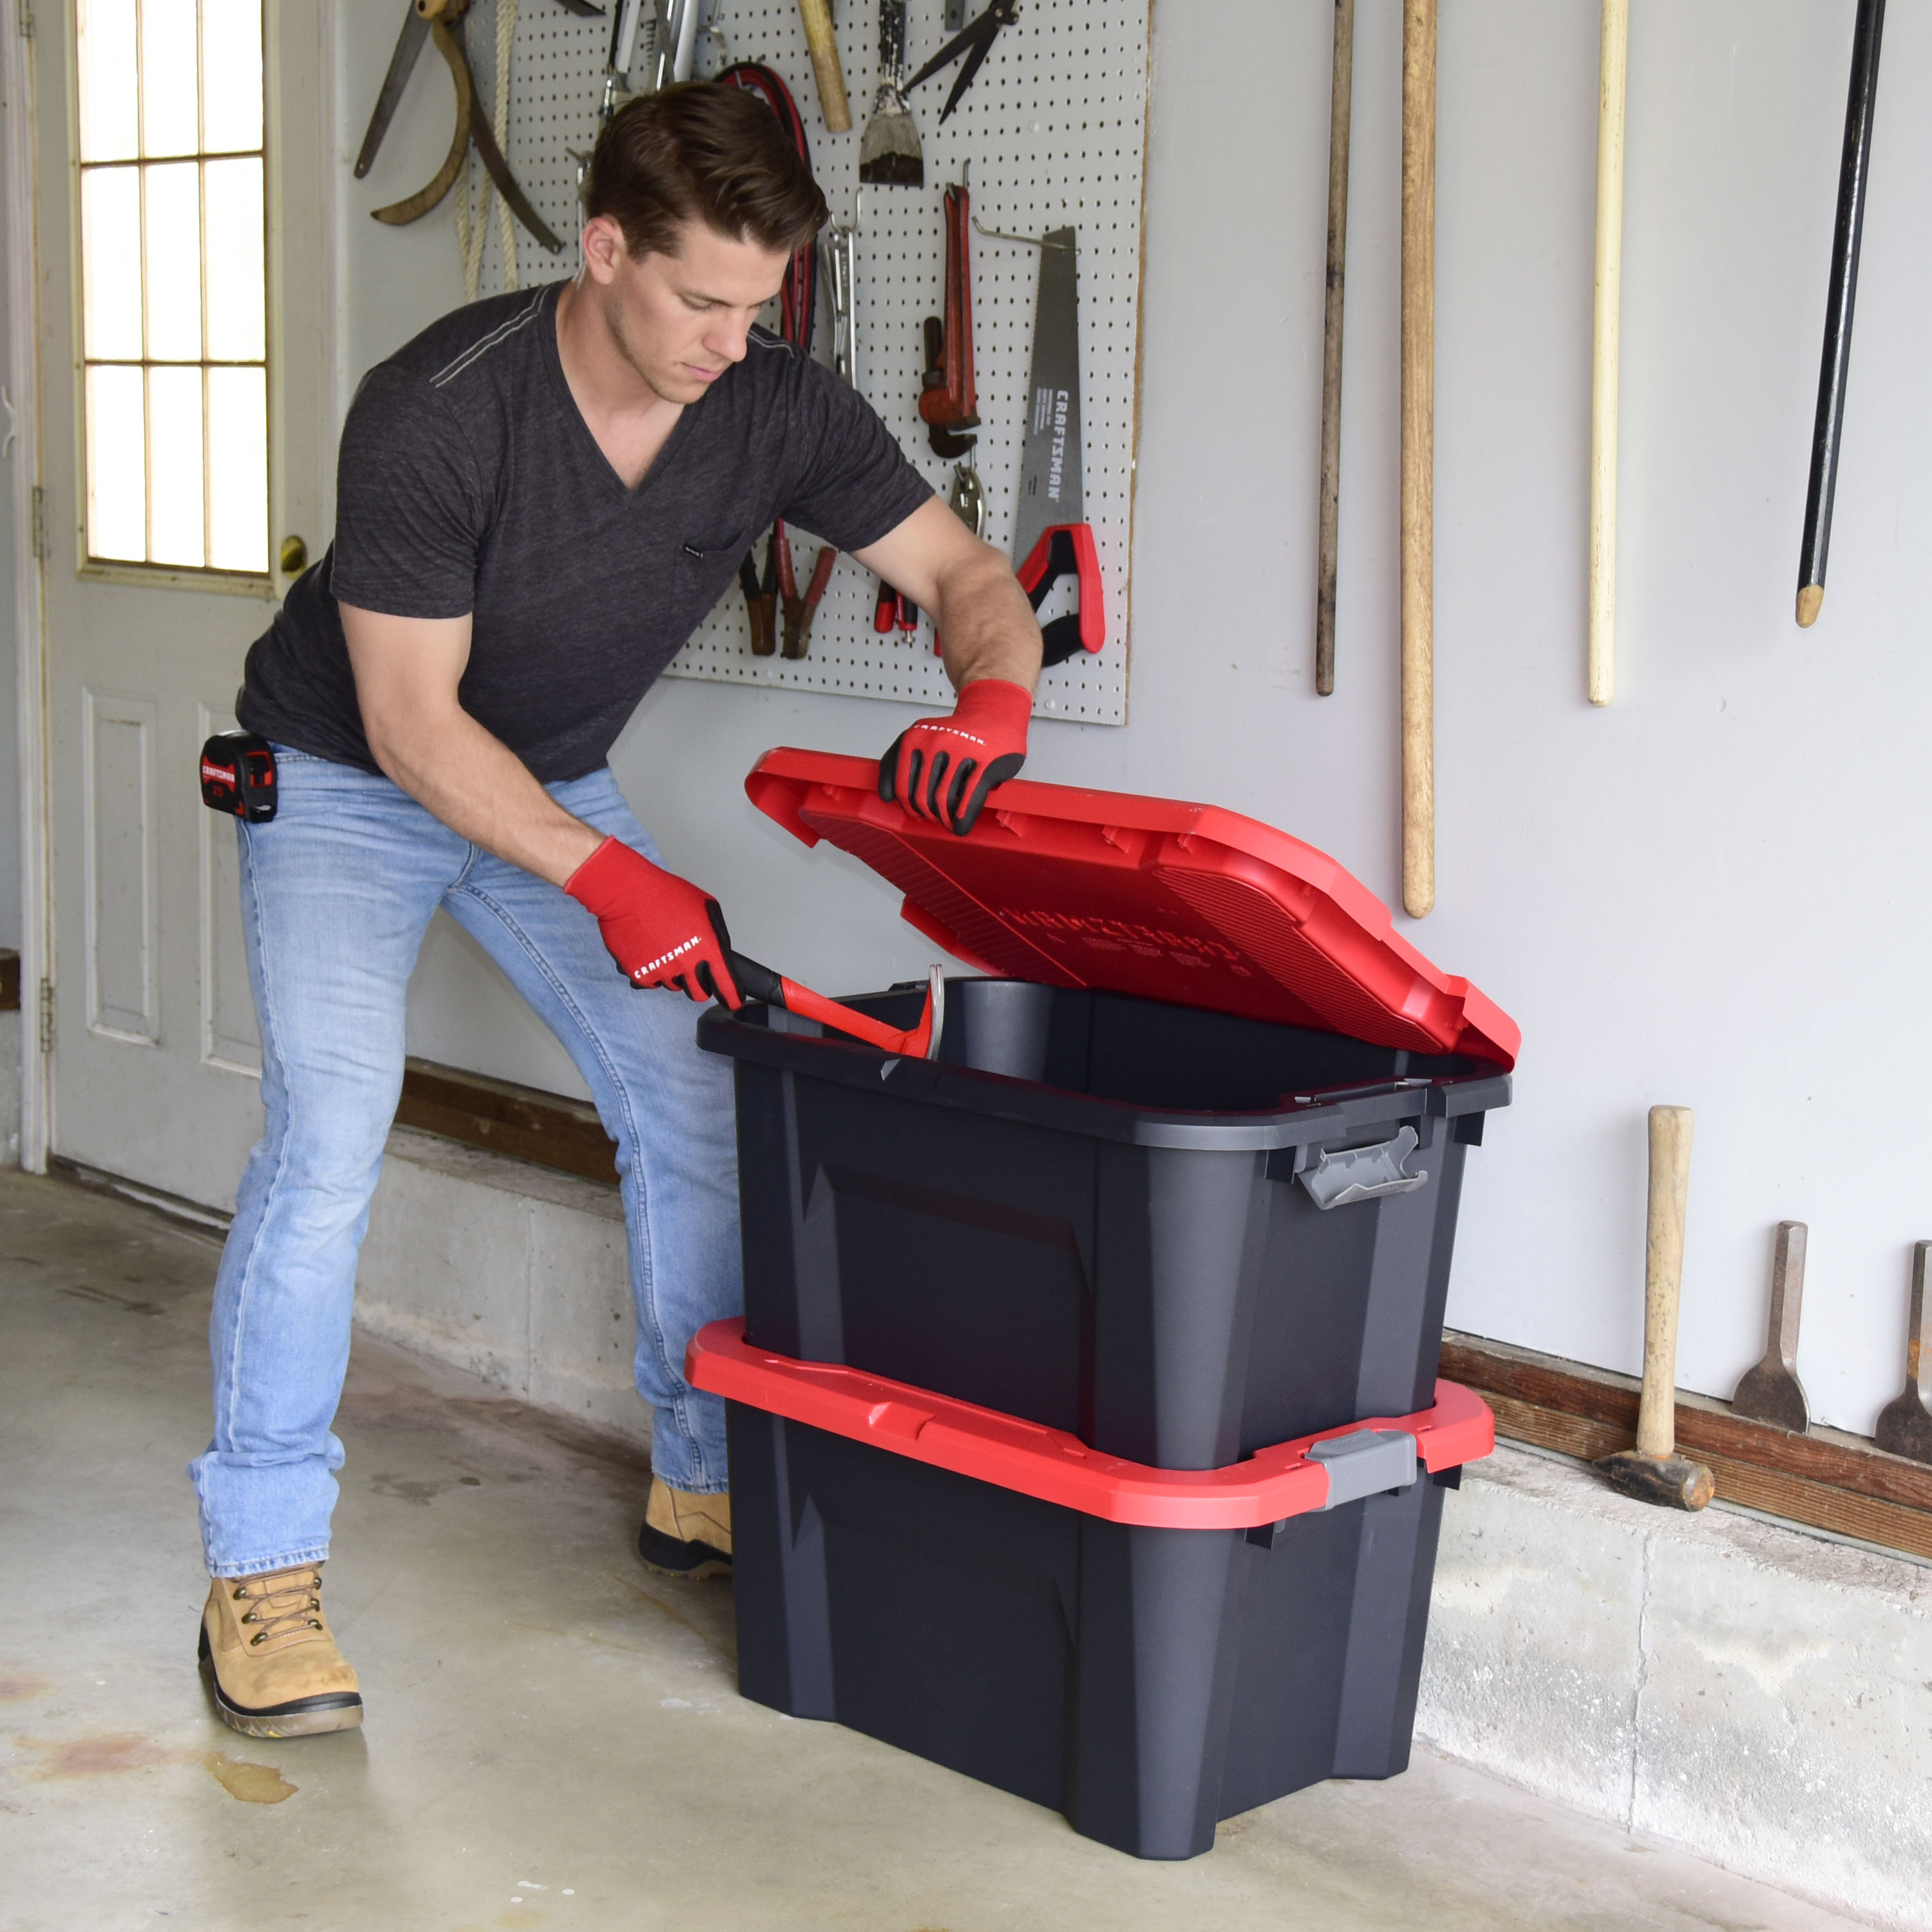  CX CRAFTSMAN, 20-Gallon Highly Durable Storage Bin & Dual  Latching Lid, (14.3”H x 19.7”W x 28.2”D), Versatile Stacking Tote and  Weather-Resistant Design, American Made [4 Pack]